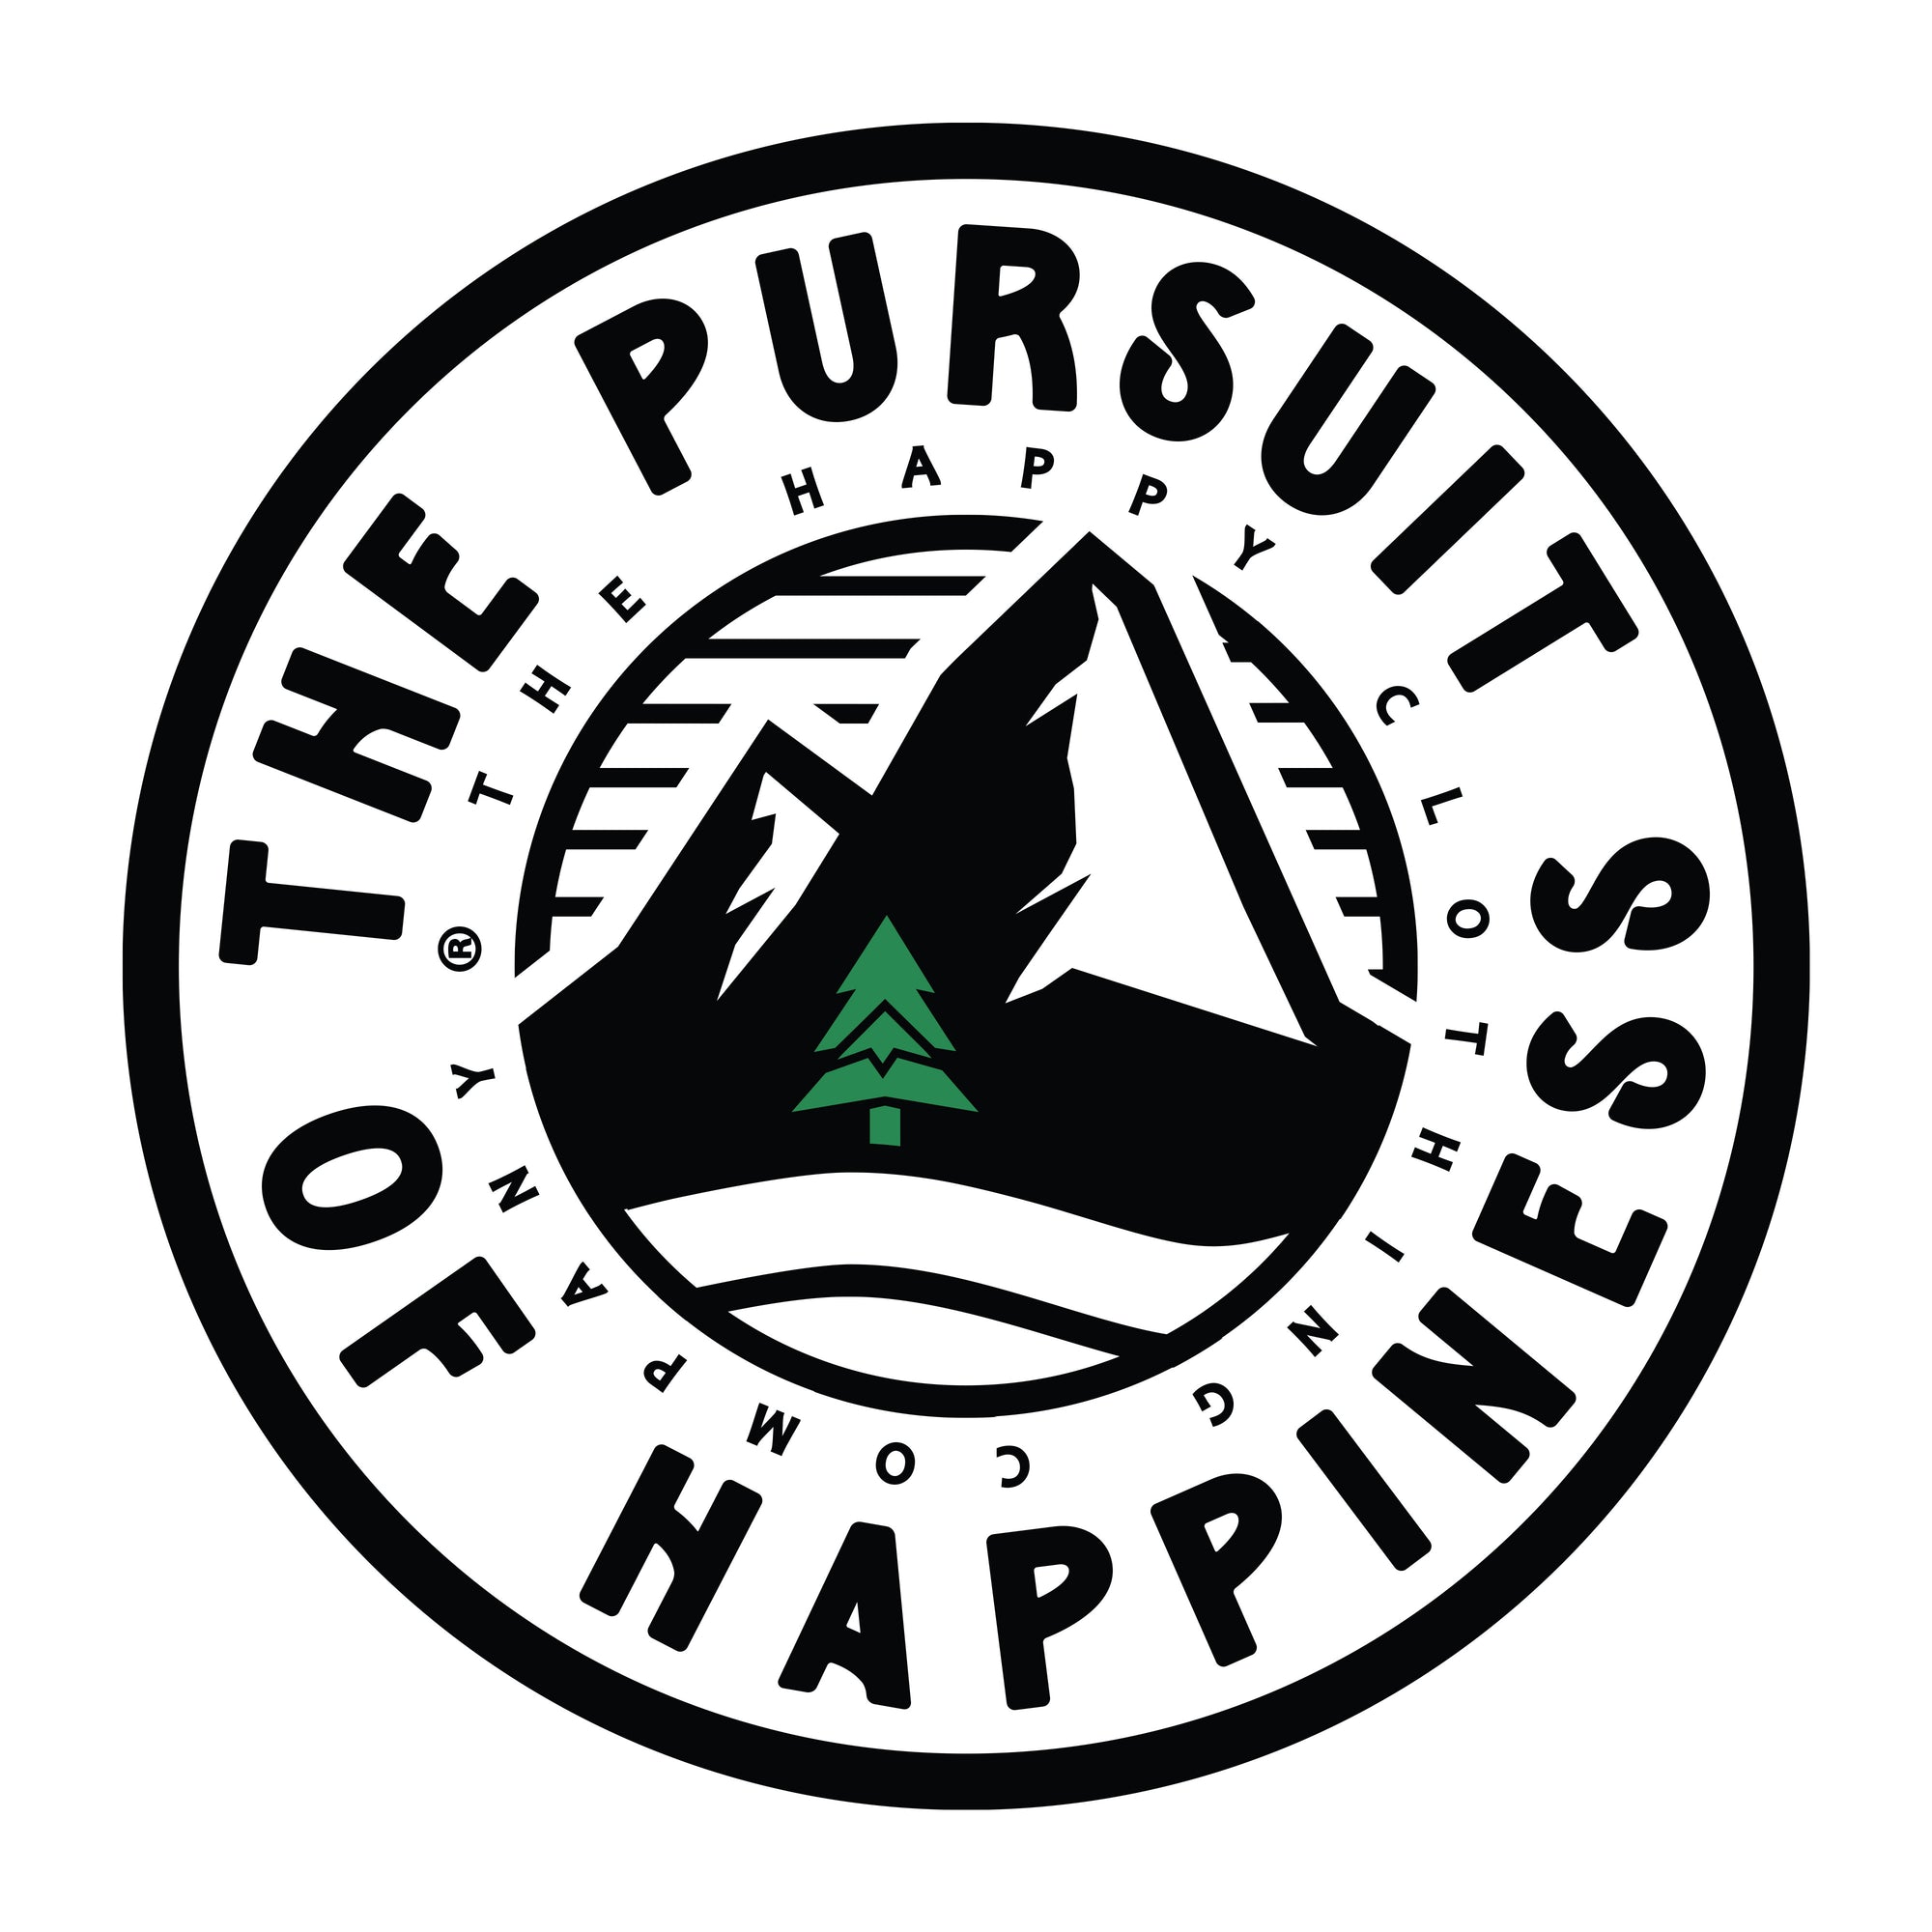 The Pursuit Of Happiness Blend Tee | Lightweight |